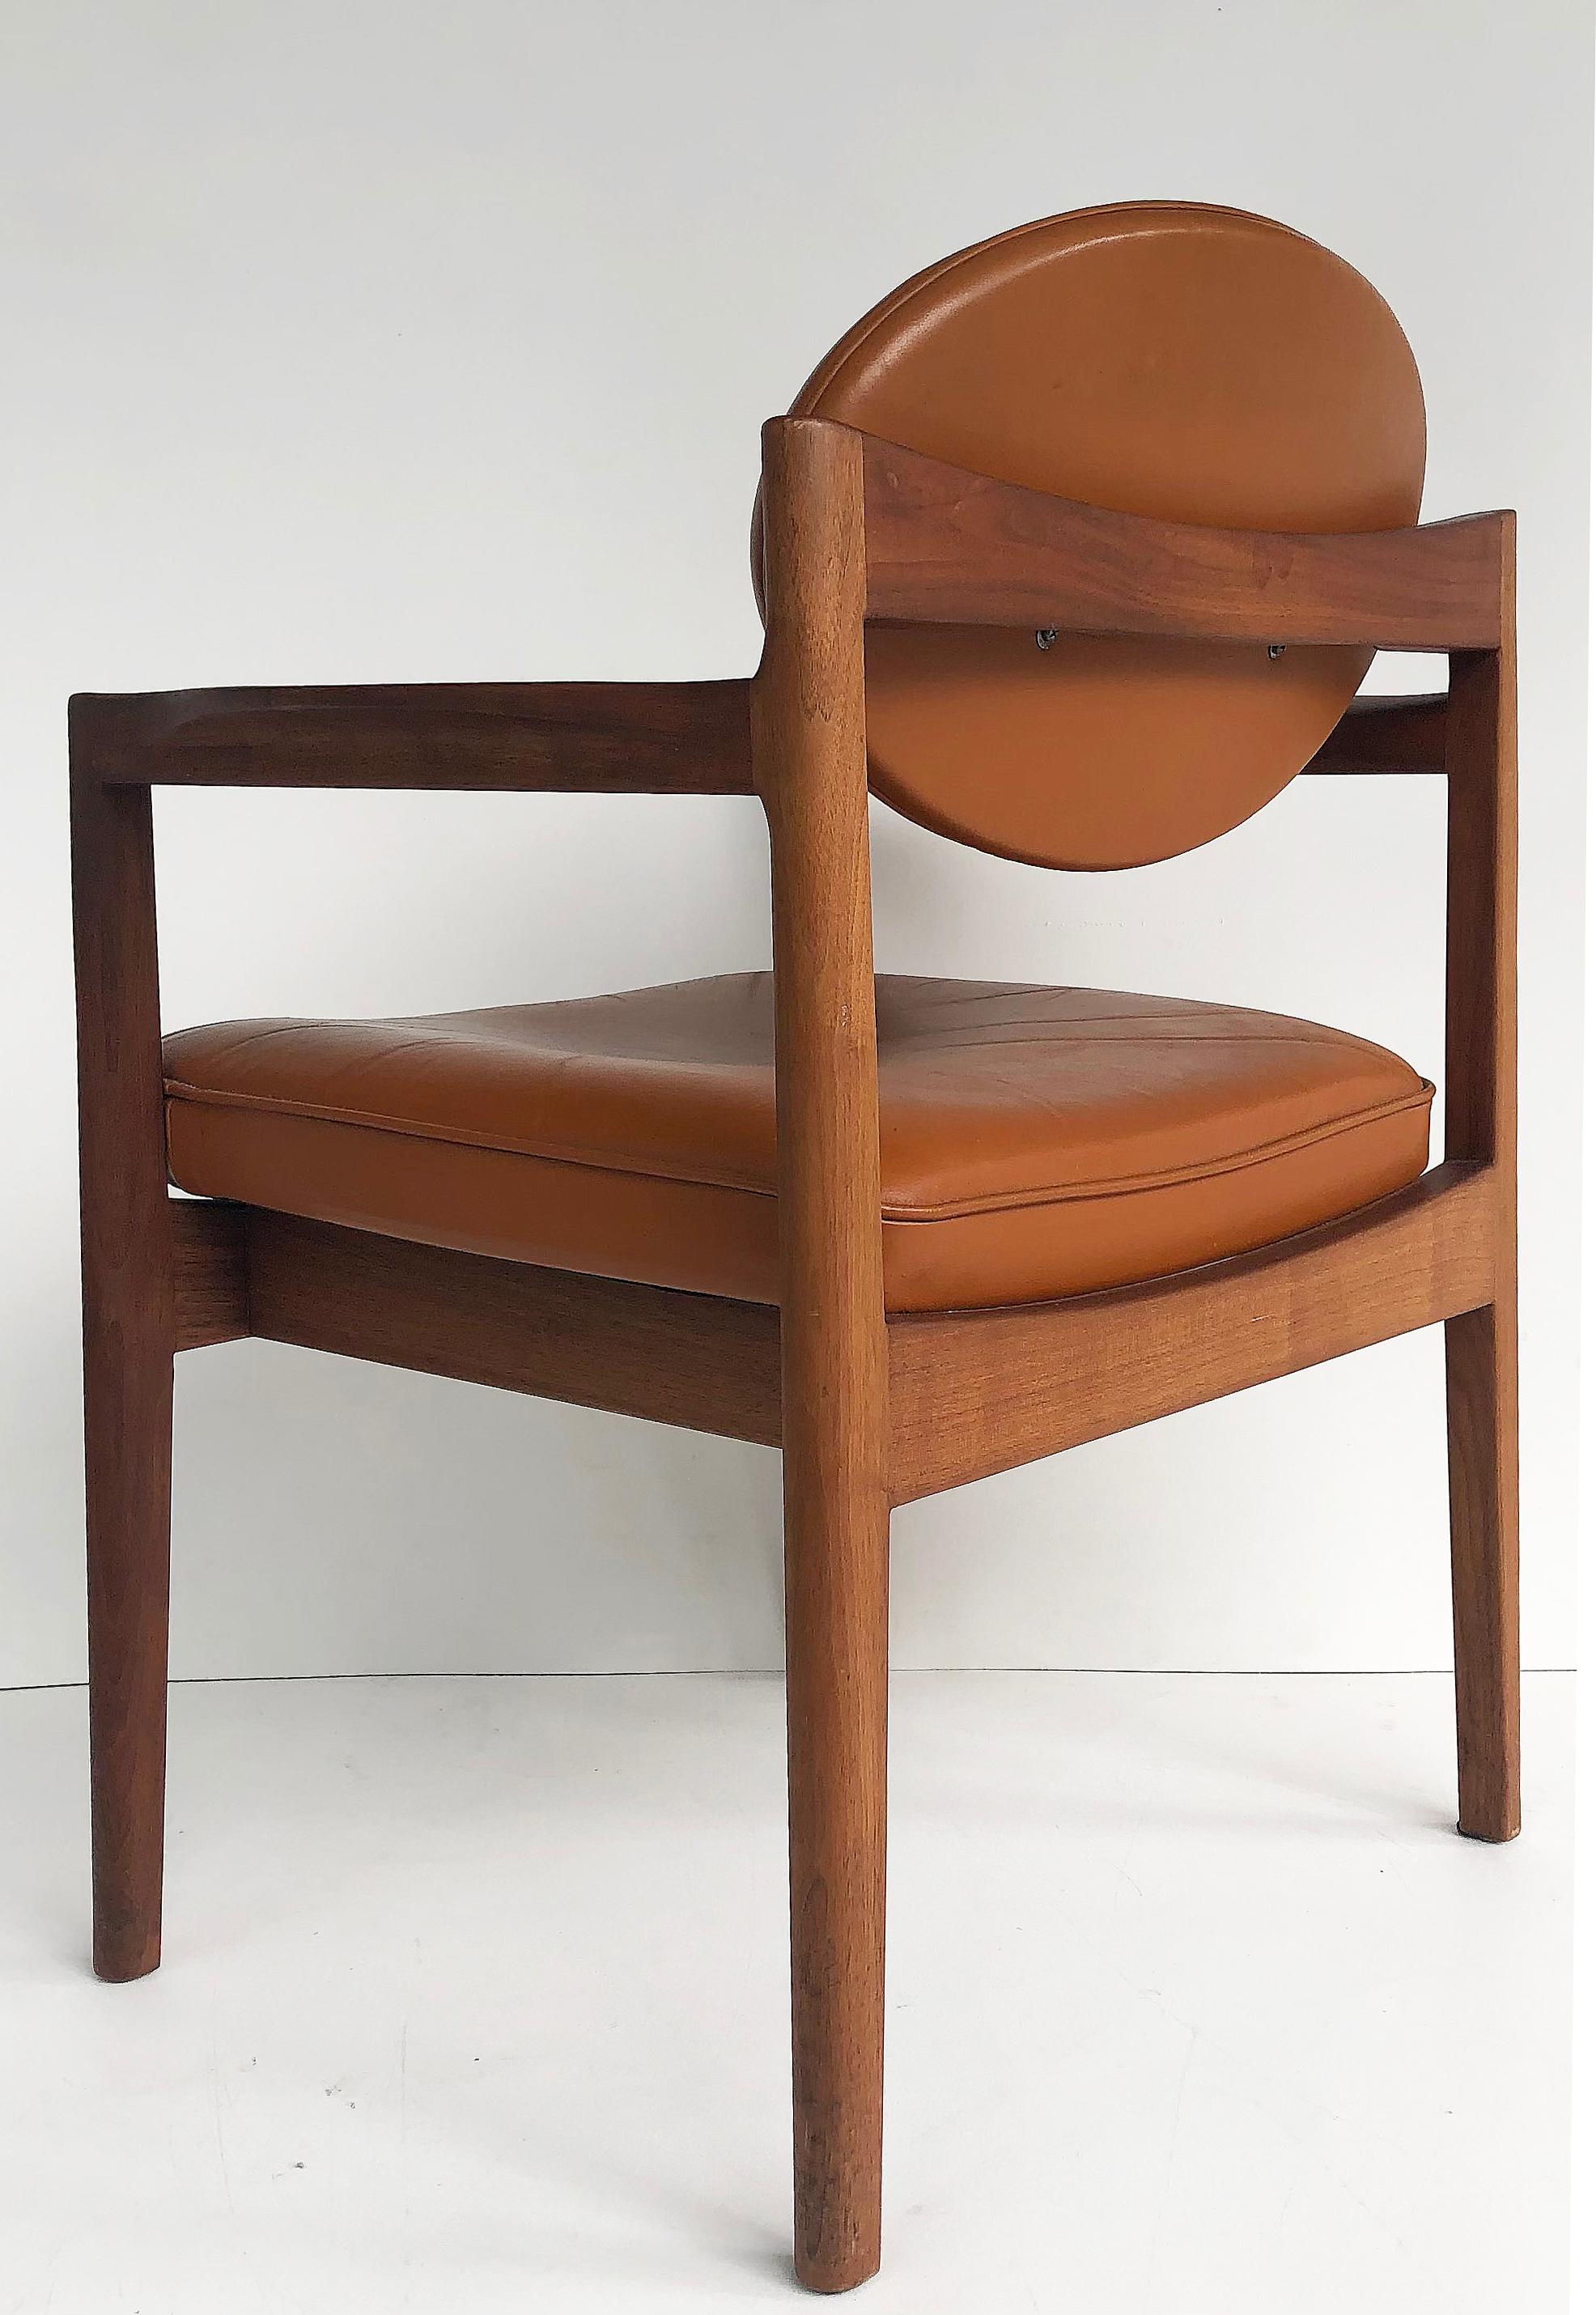 Jens Risom Design Pair of Oiled Walnut & Leather Upholstered Armchairs, c.1965 For Sale 1